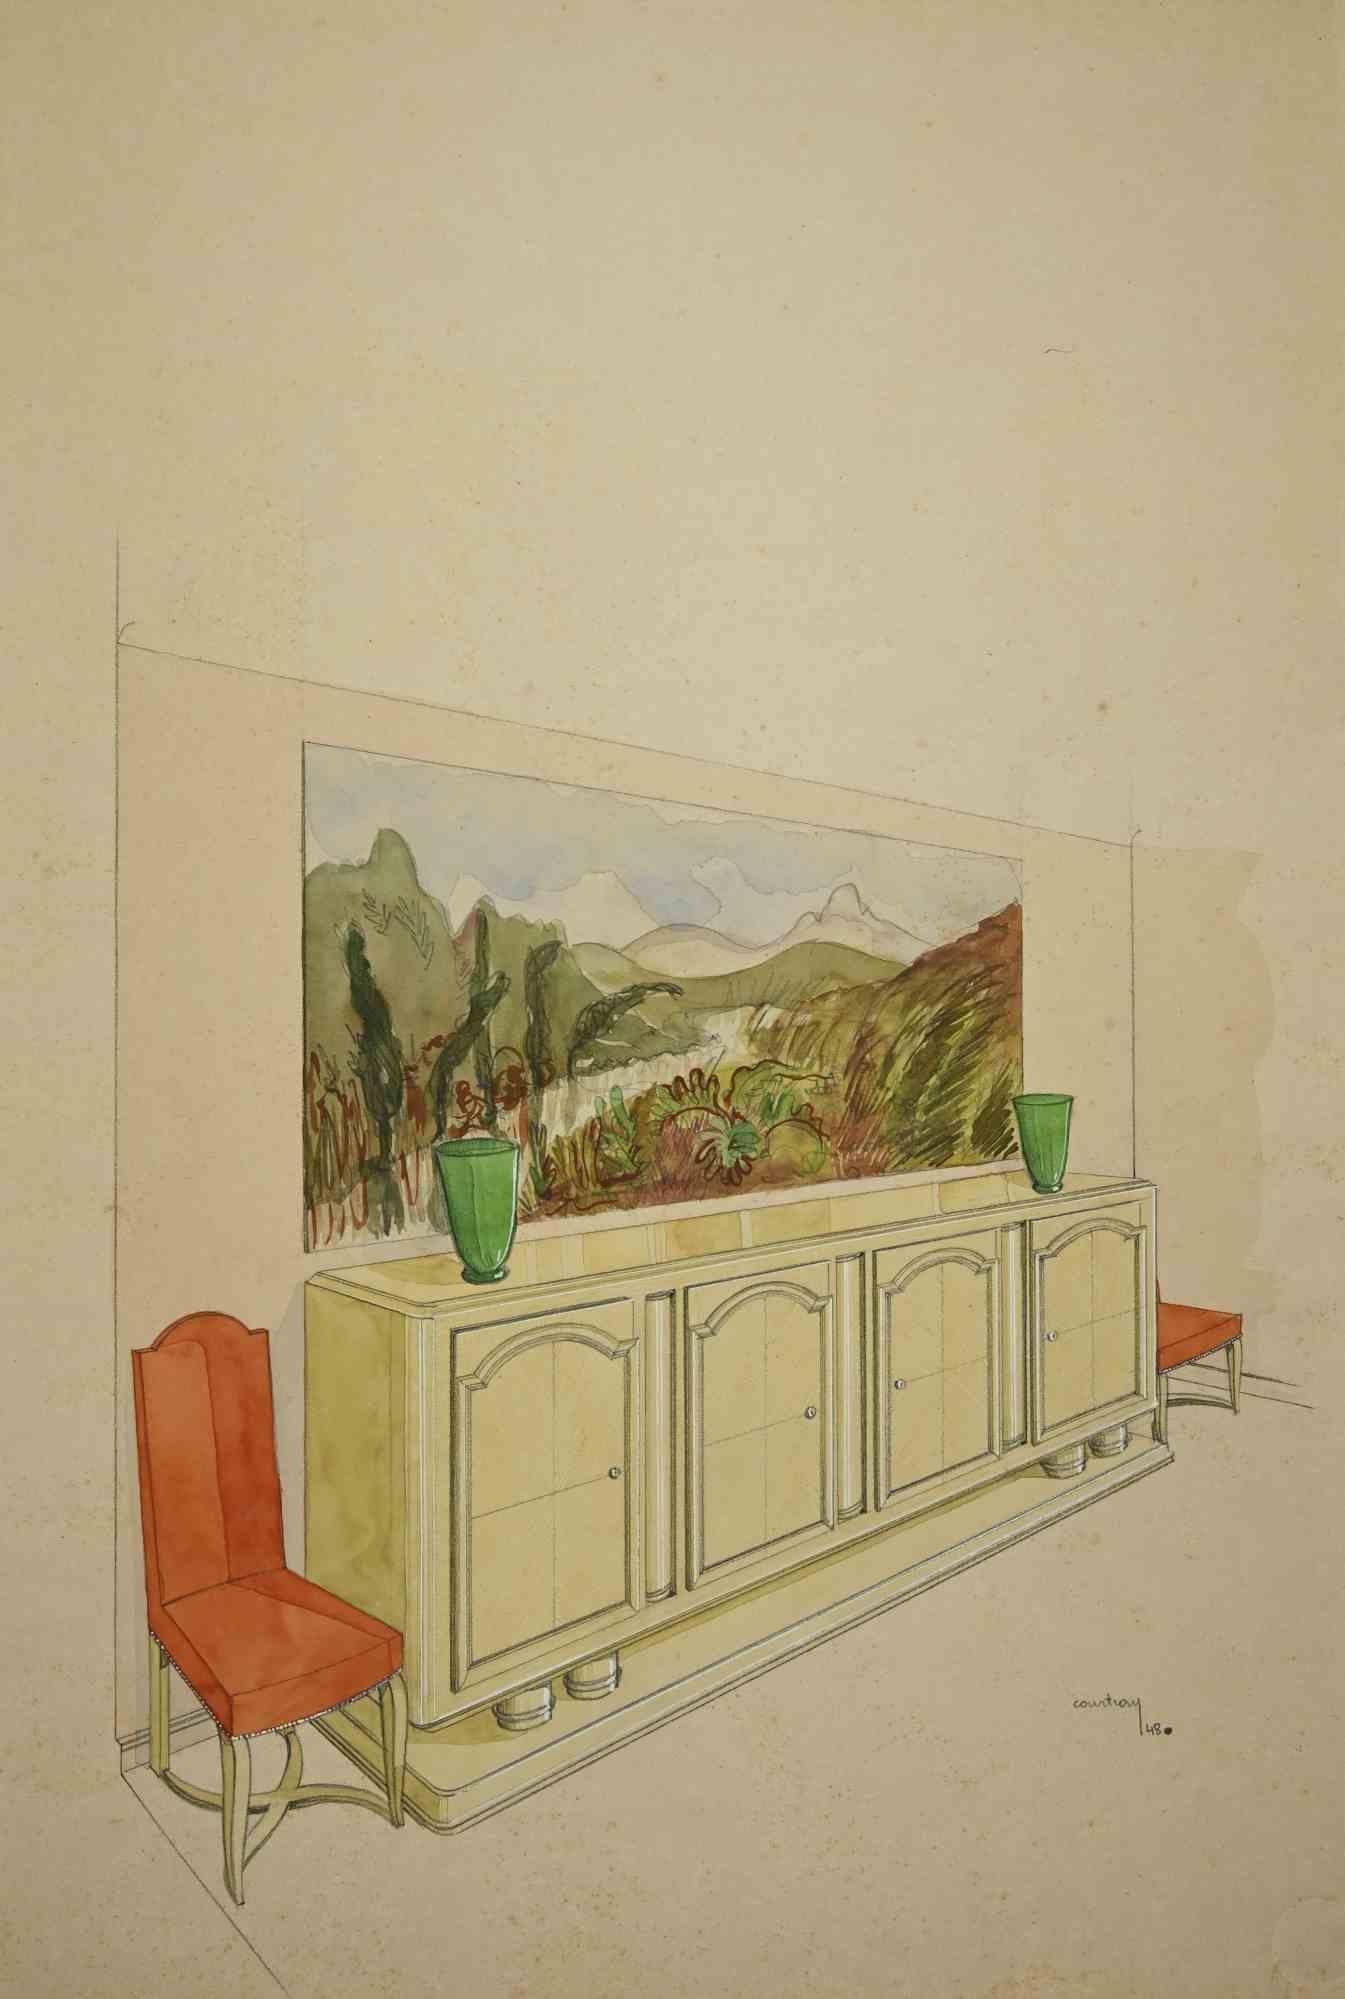 Interior Design is a beautiful drawing on paper, realized in 1948 by the French architect  Victor Courtray (1897-1971). Ink and watercolor on paper.

Hand-signed and dated on the lower right margin.

The artwork represents a minimalistic, clean